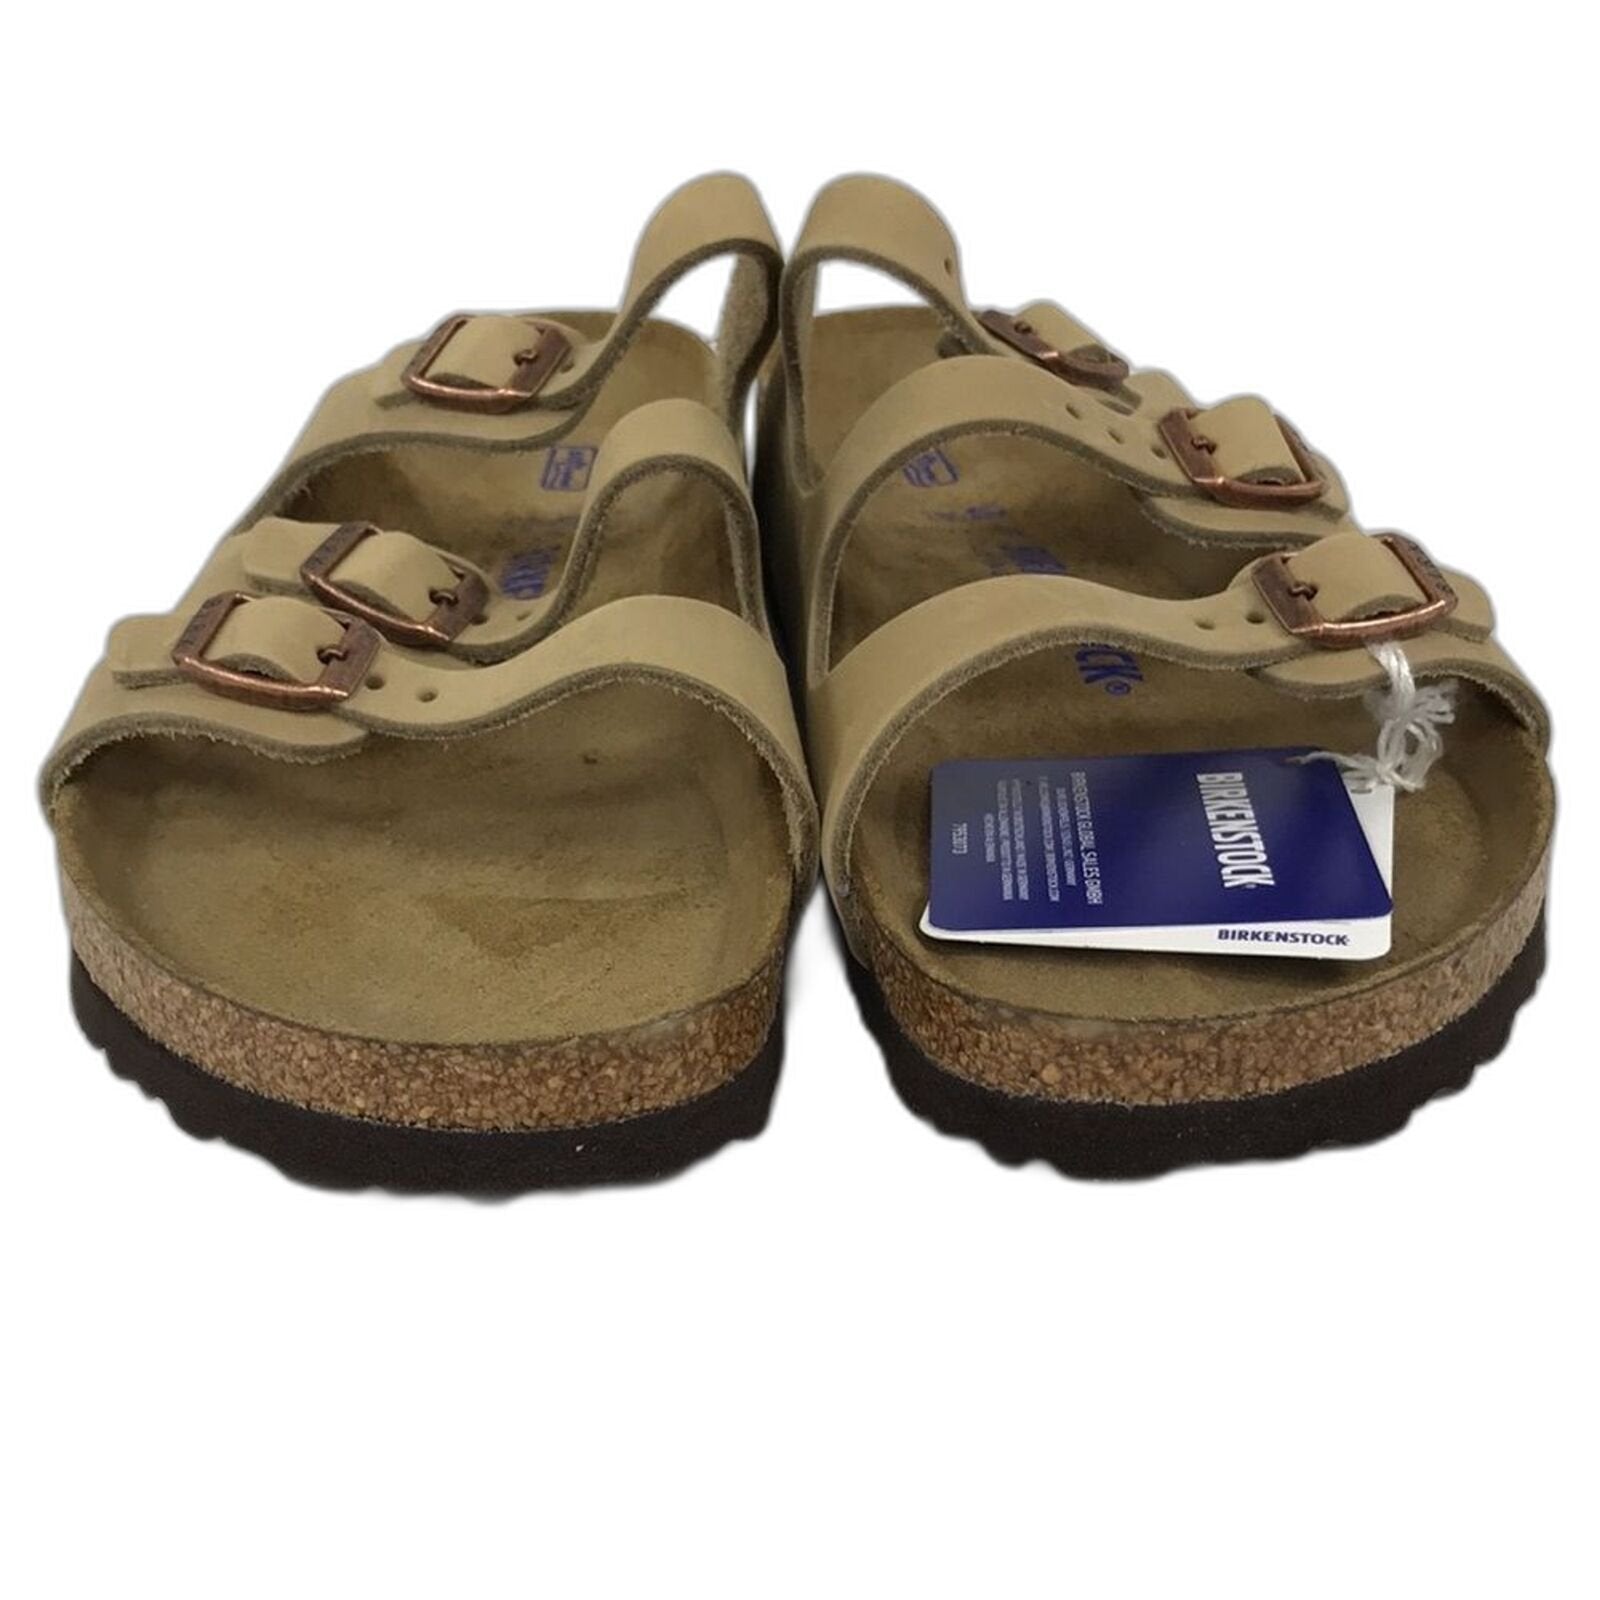 Florida Soft Footbed Womens Sandals 9 US